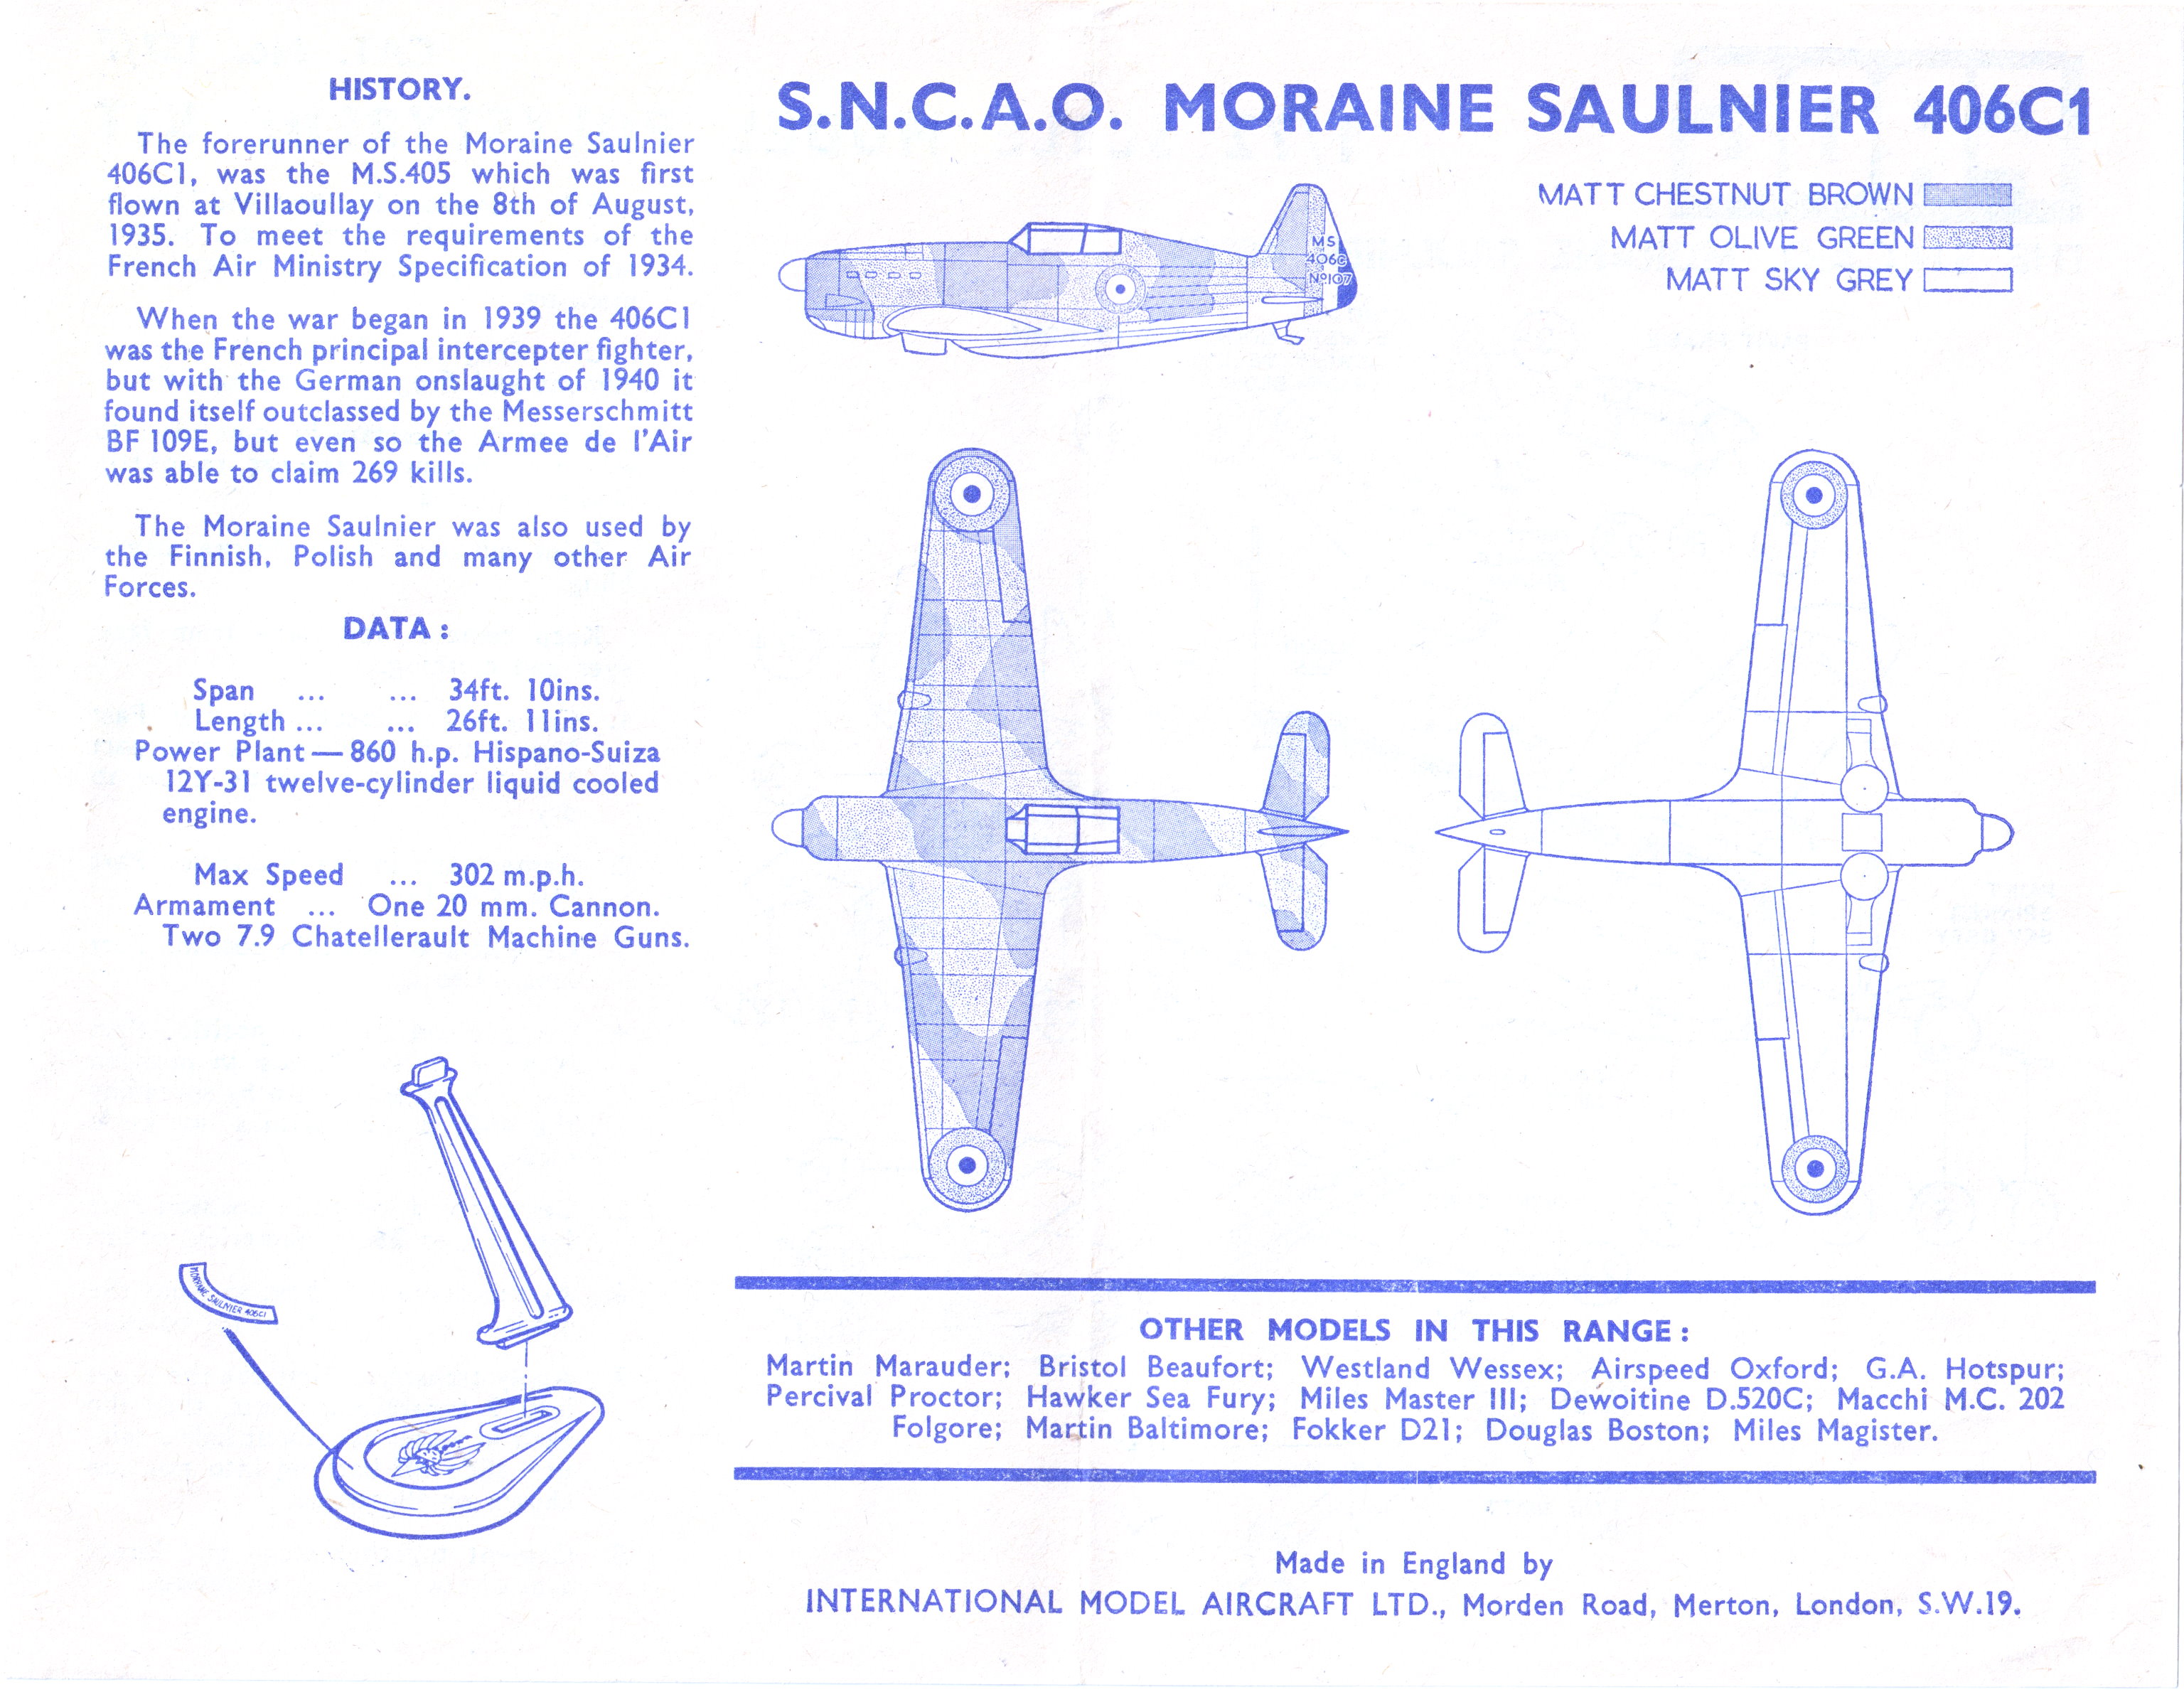 FROG Blue Series 157P, Morane Saulnier 406, 1963 painting and marking guide